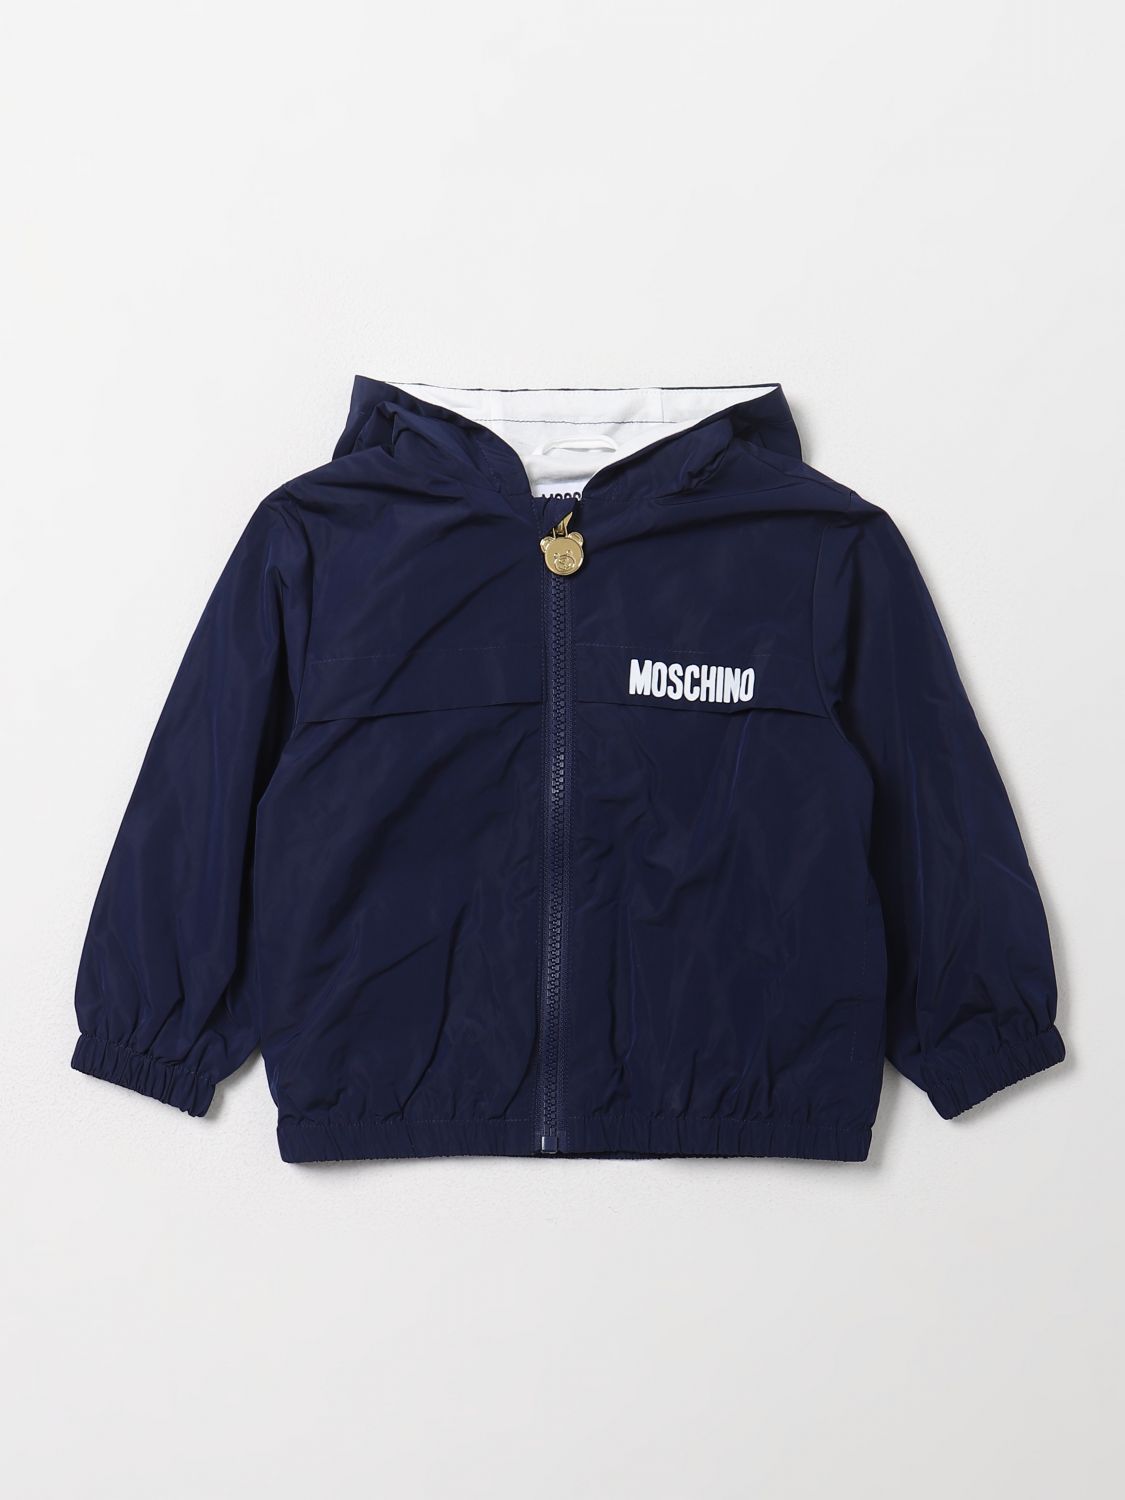 Moschino Baby Jacket  Kids Color Navy